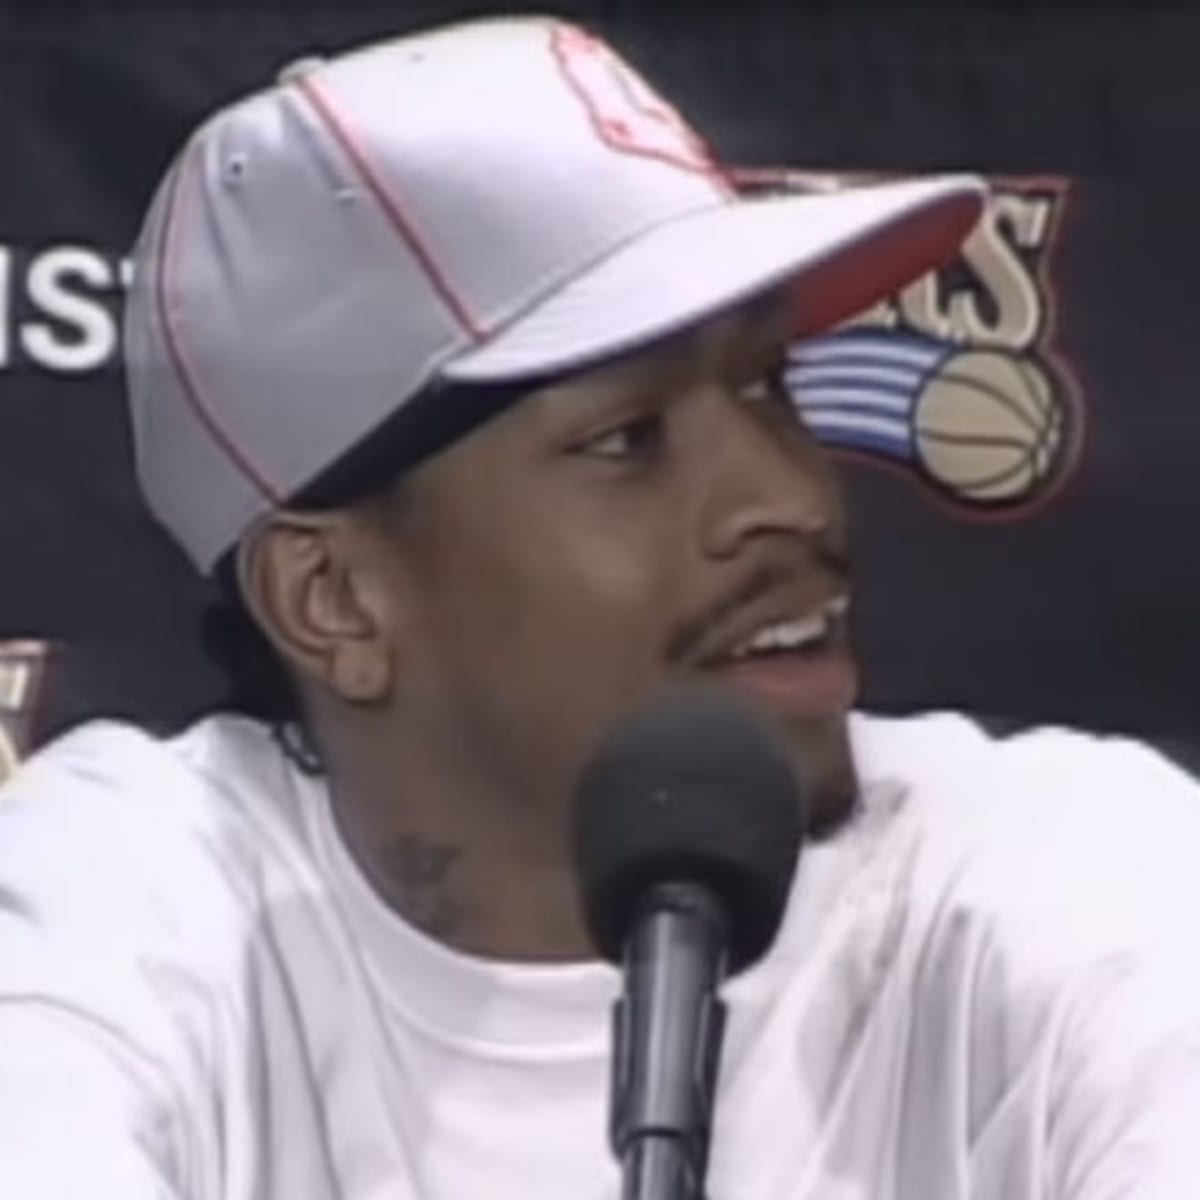 Video: 10-Year Anniversary of Allen Iverson's 'Practice?!' Rant